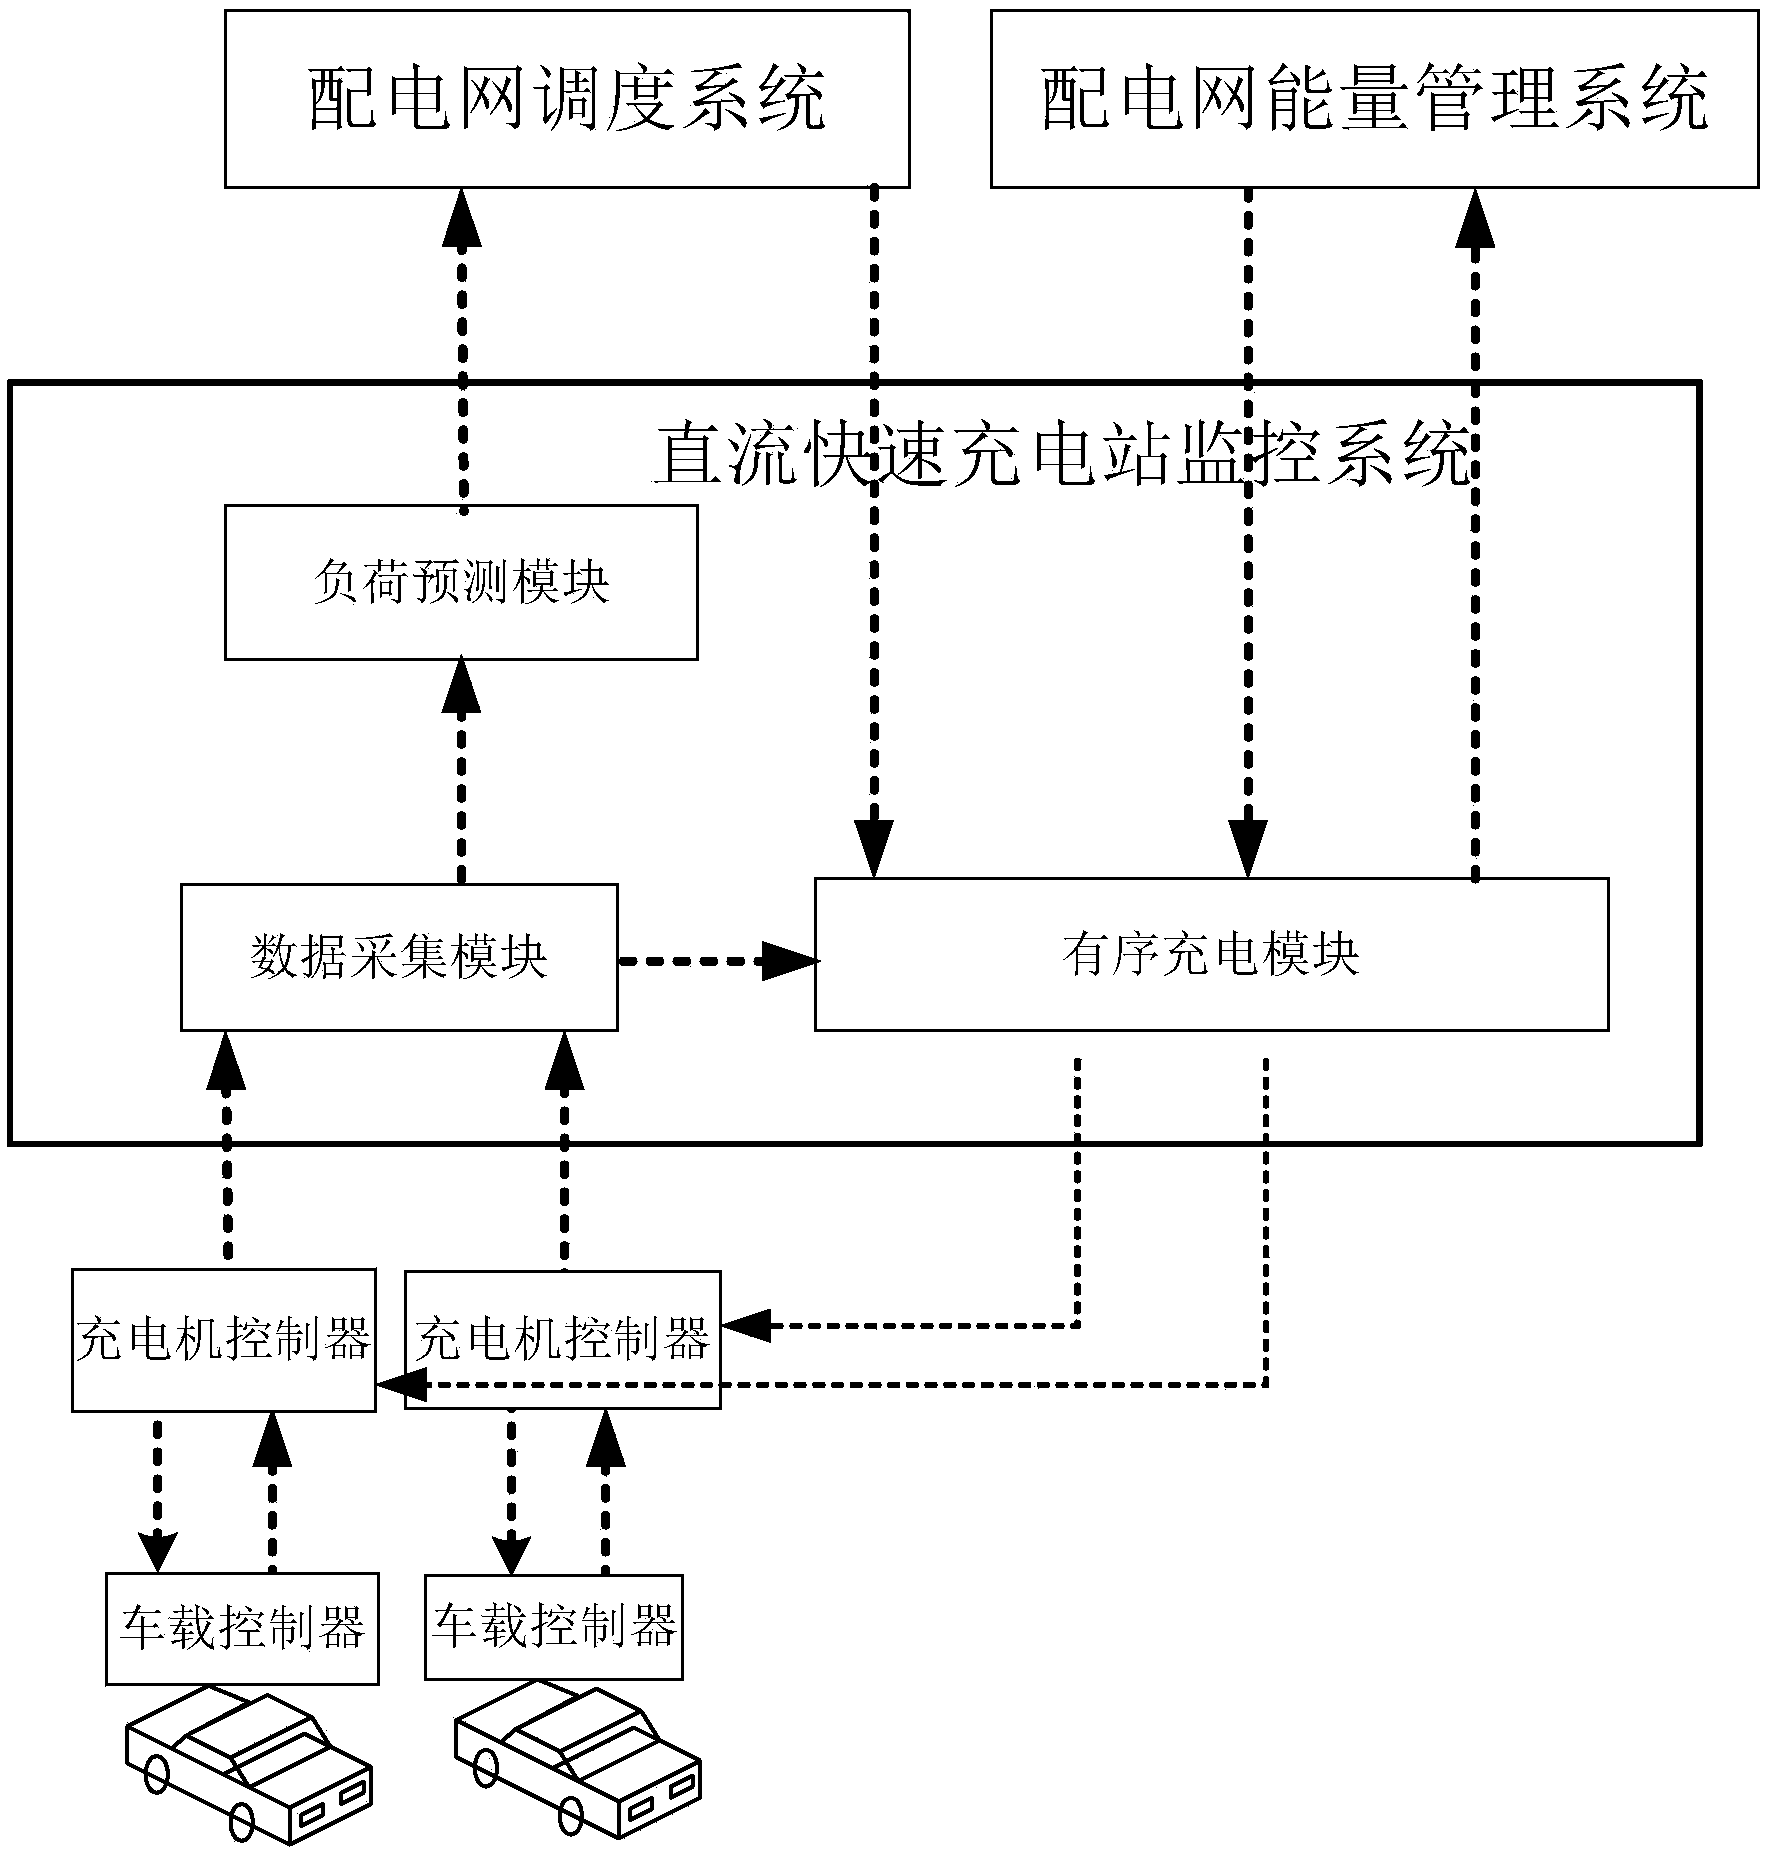 Direct-current fast charging station managing system and method for electric automobile from power grid